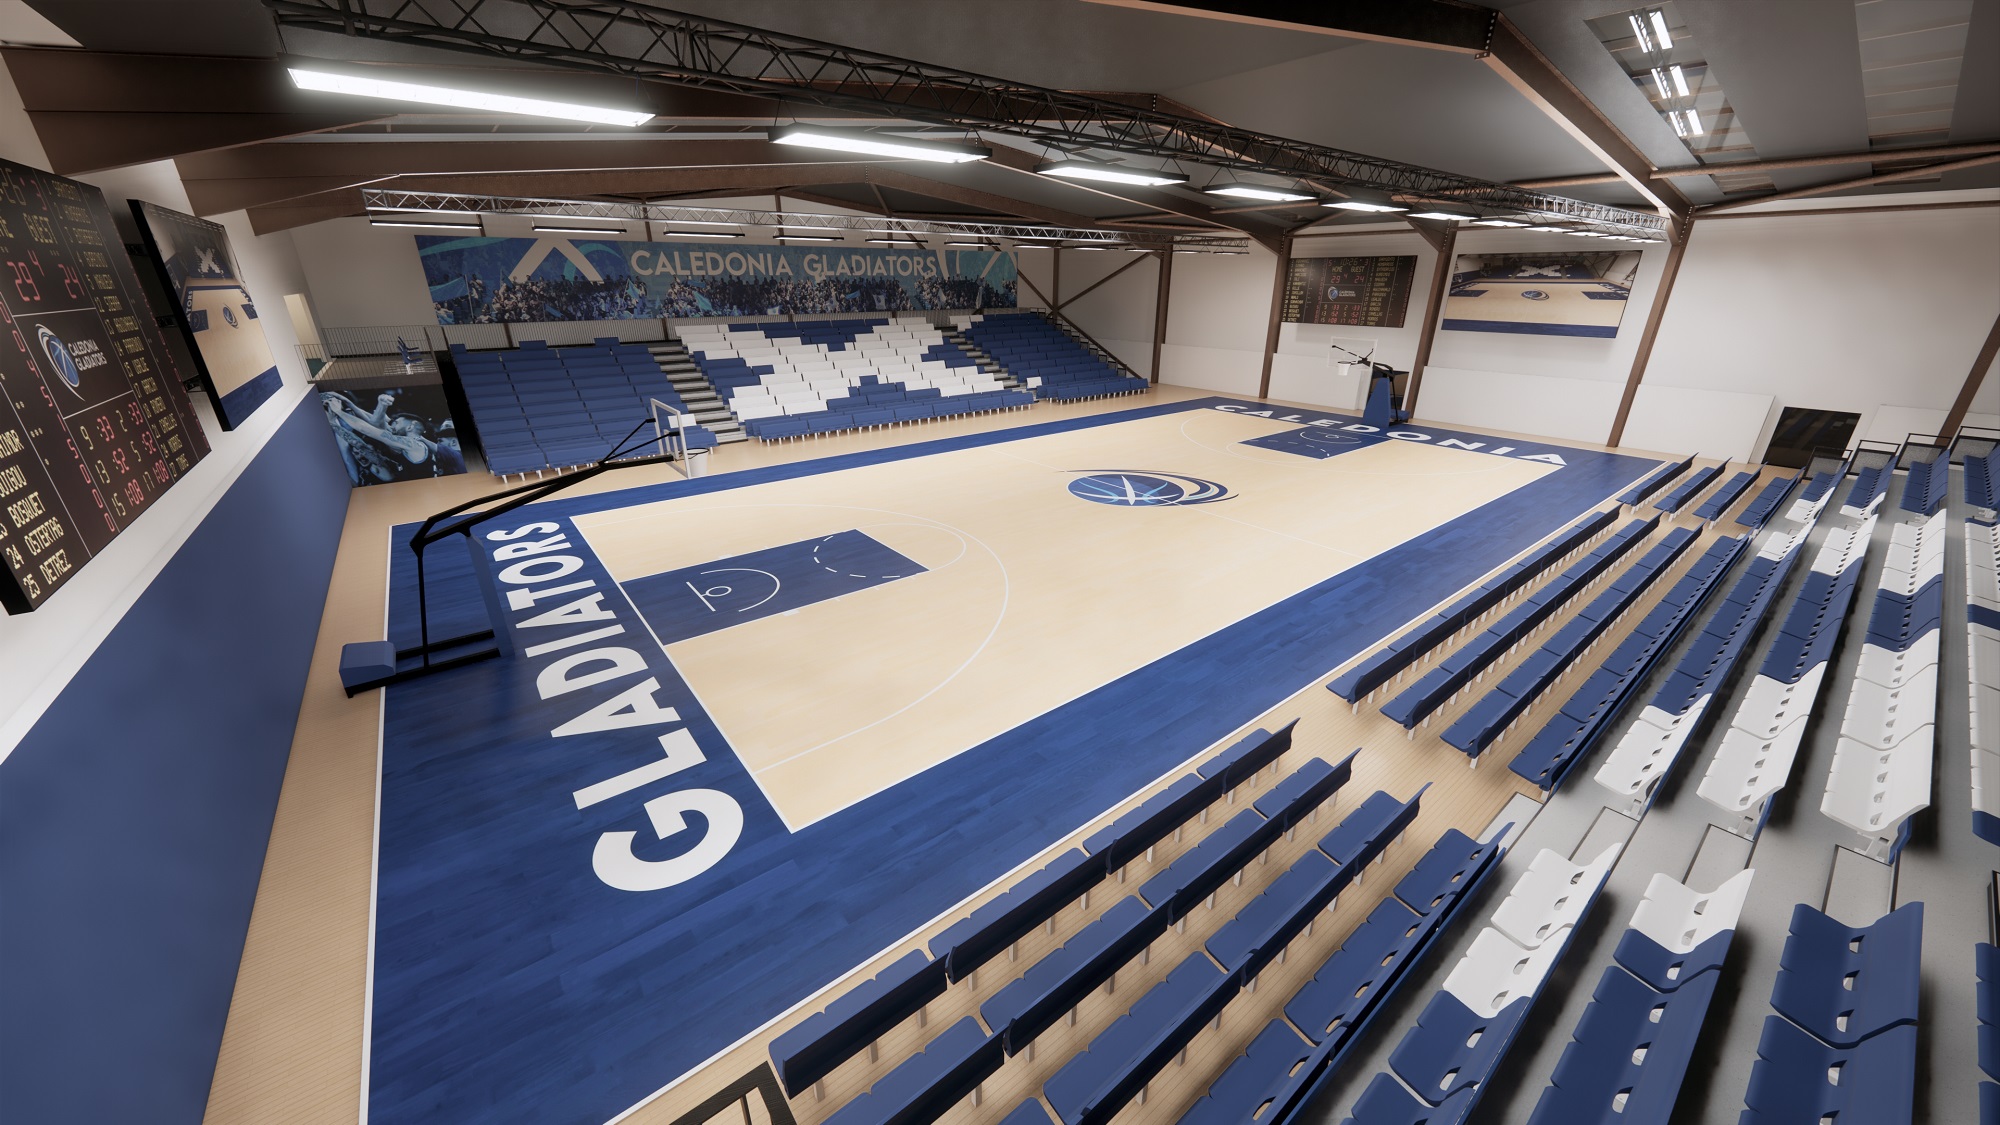 In Pictures: First look inside Caledonia Gladiators’ new stadium